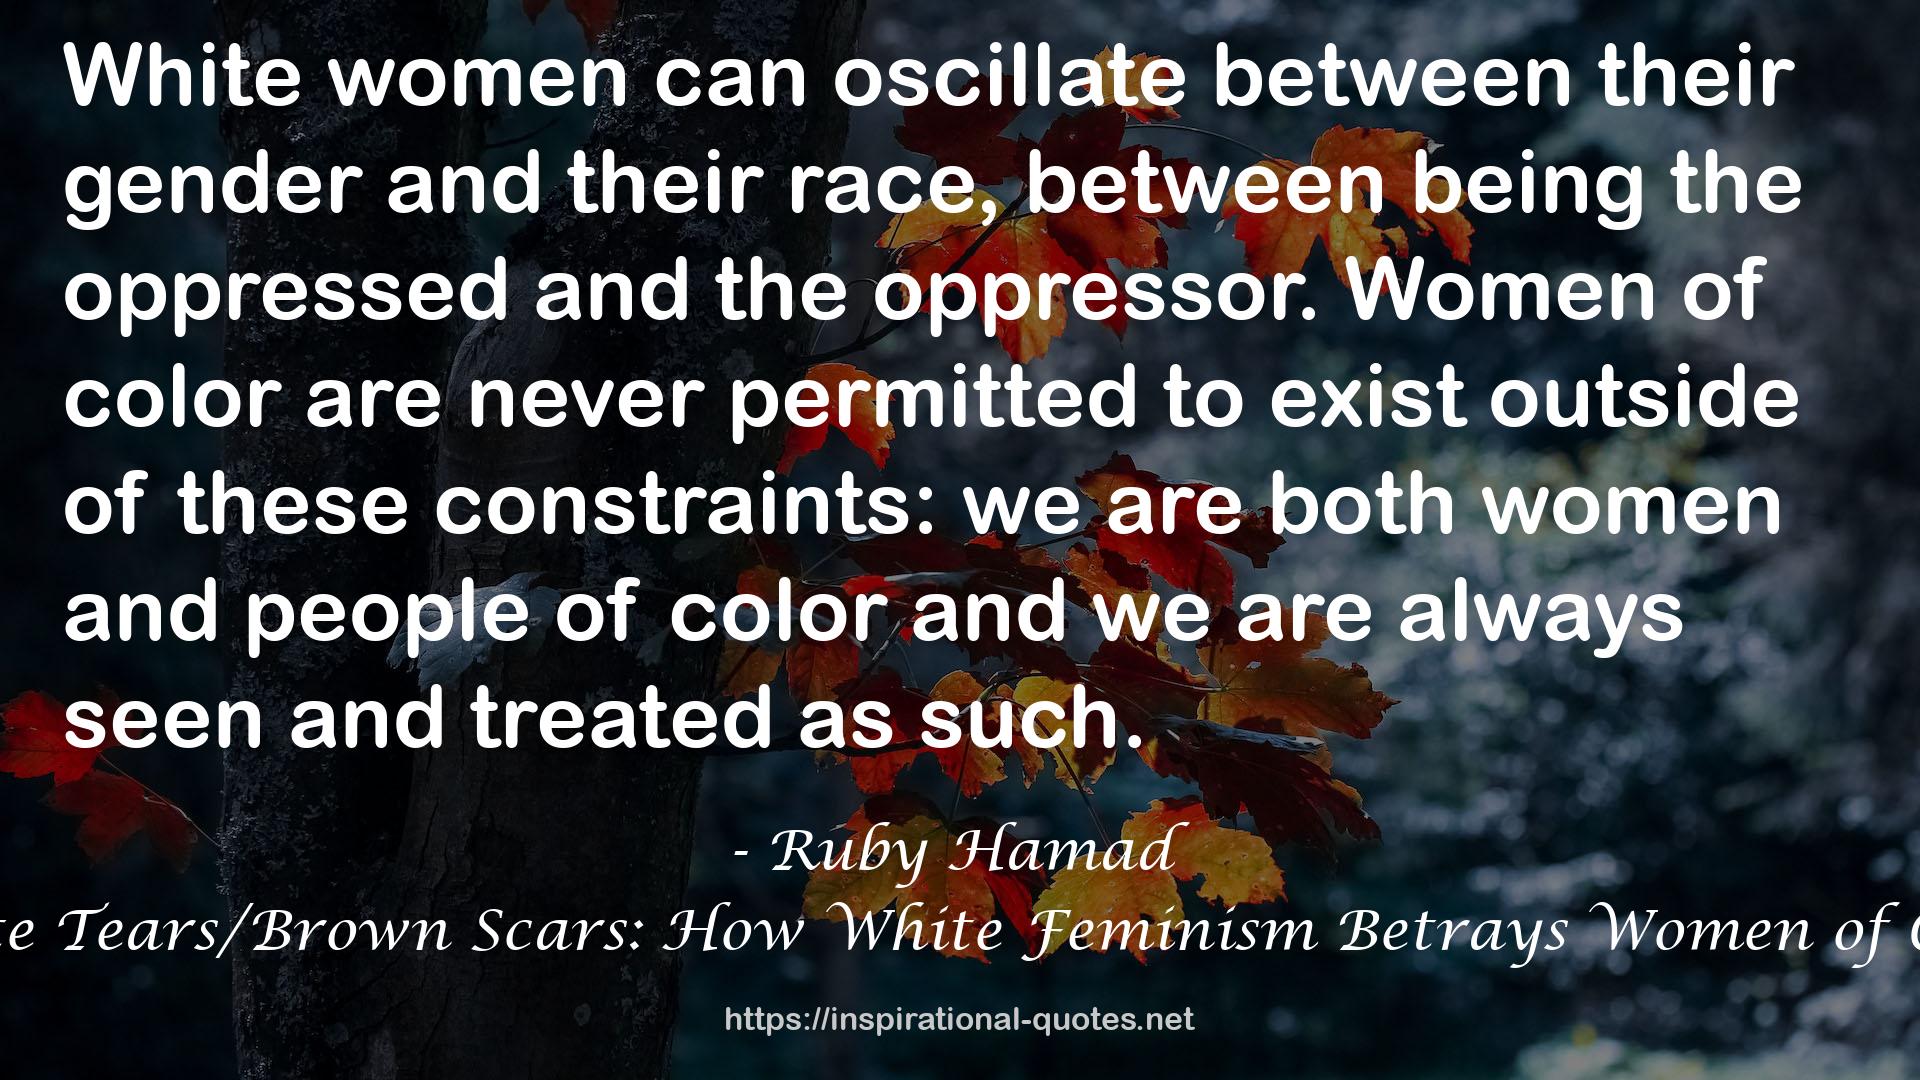 Ruby Hamad QUOTES